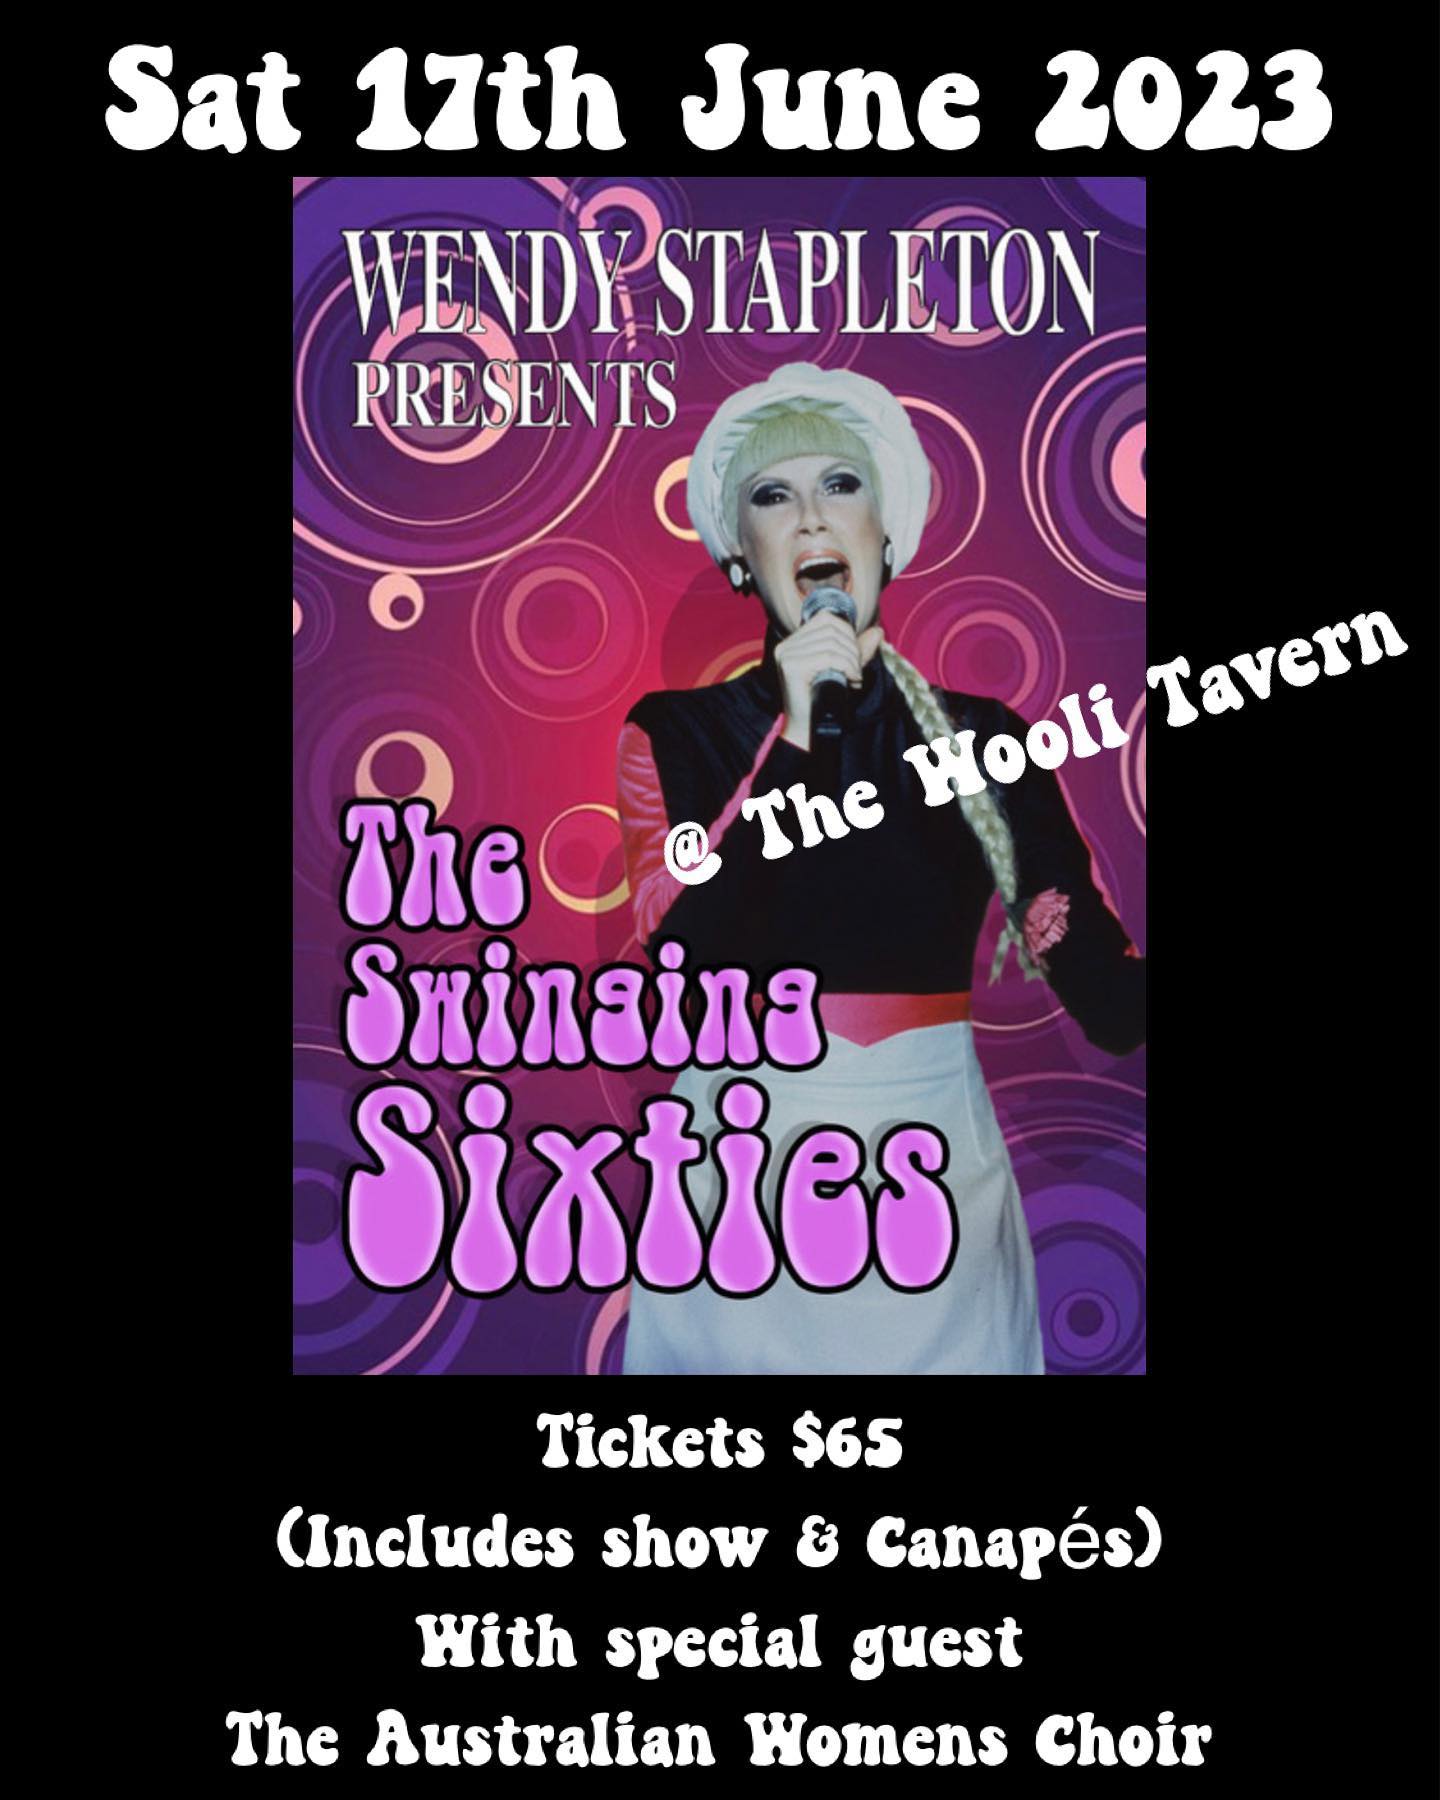 The Wooli Tavern - Swinging Sixties with Wendy Stapleton who is back to present this sixties show with special guest The Australian Womens. Tickets $65